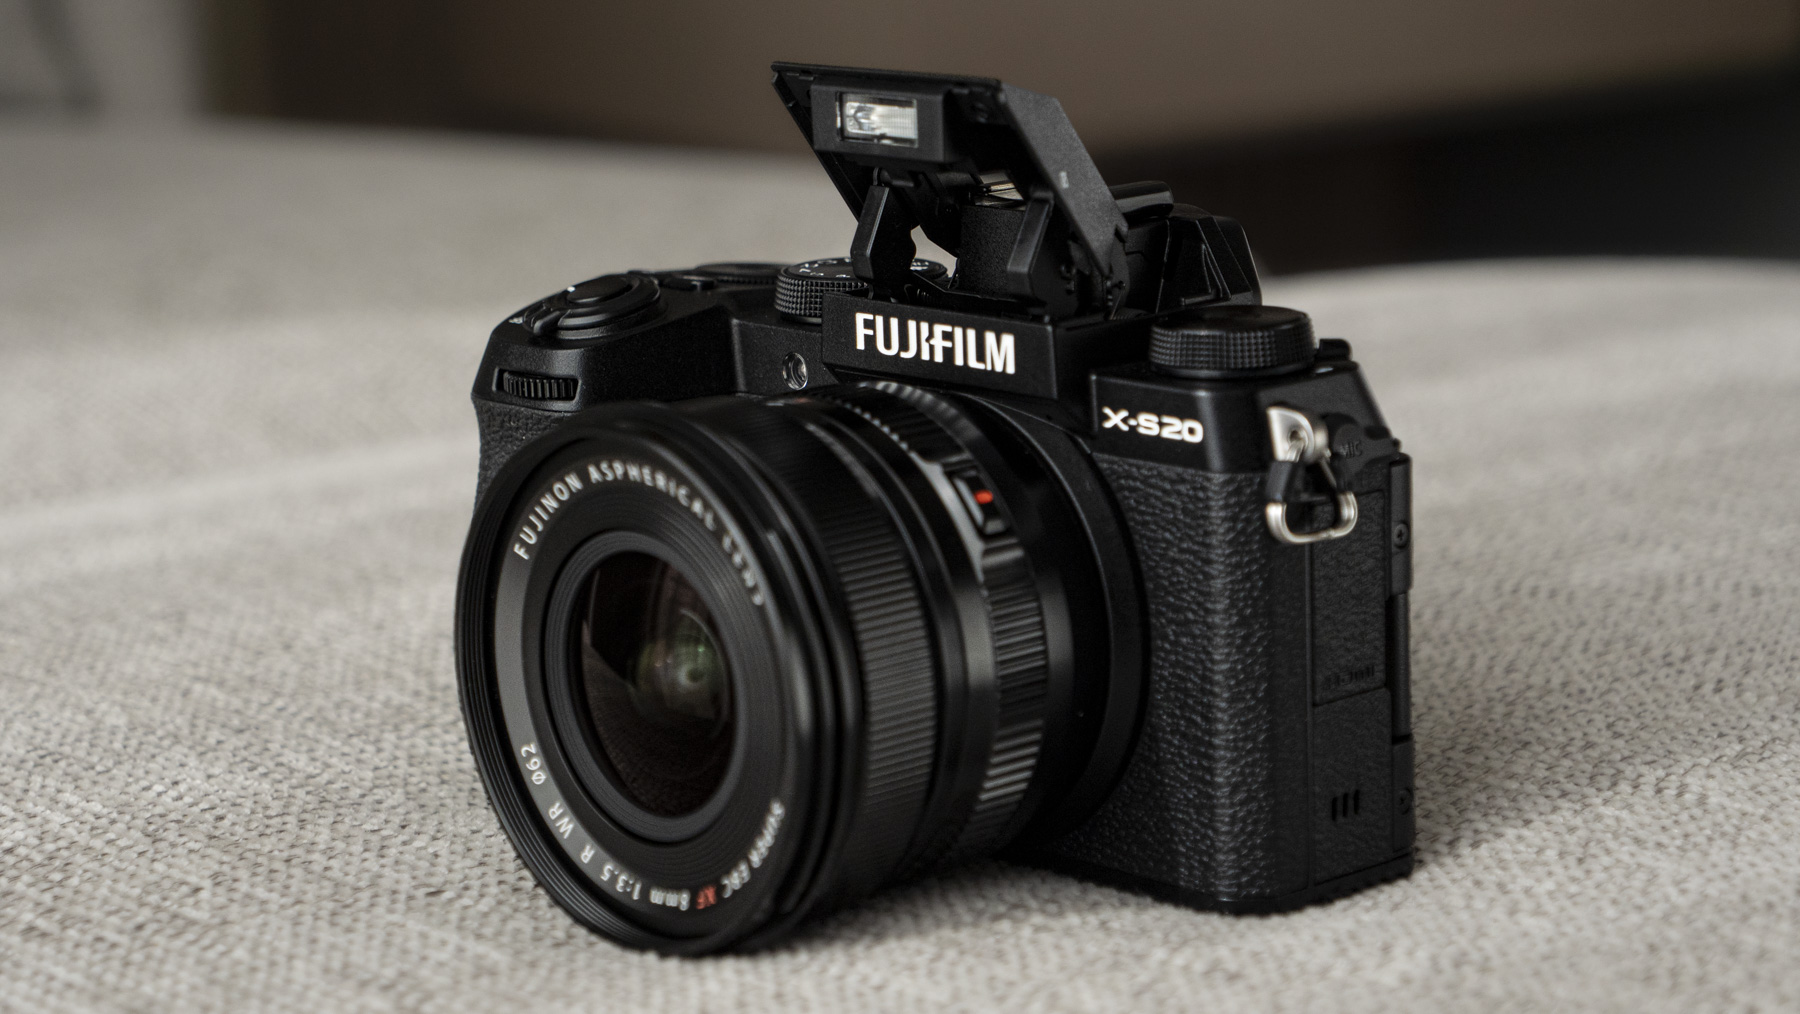 Fujifilm X-S20 camera front with built-in flash up